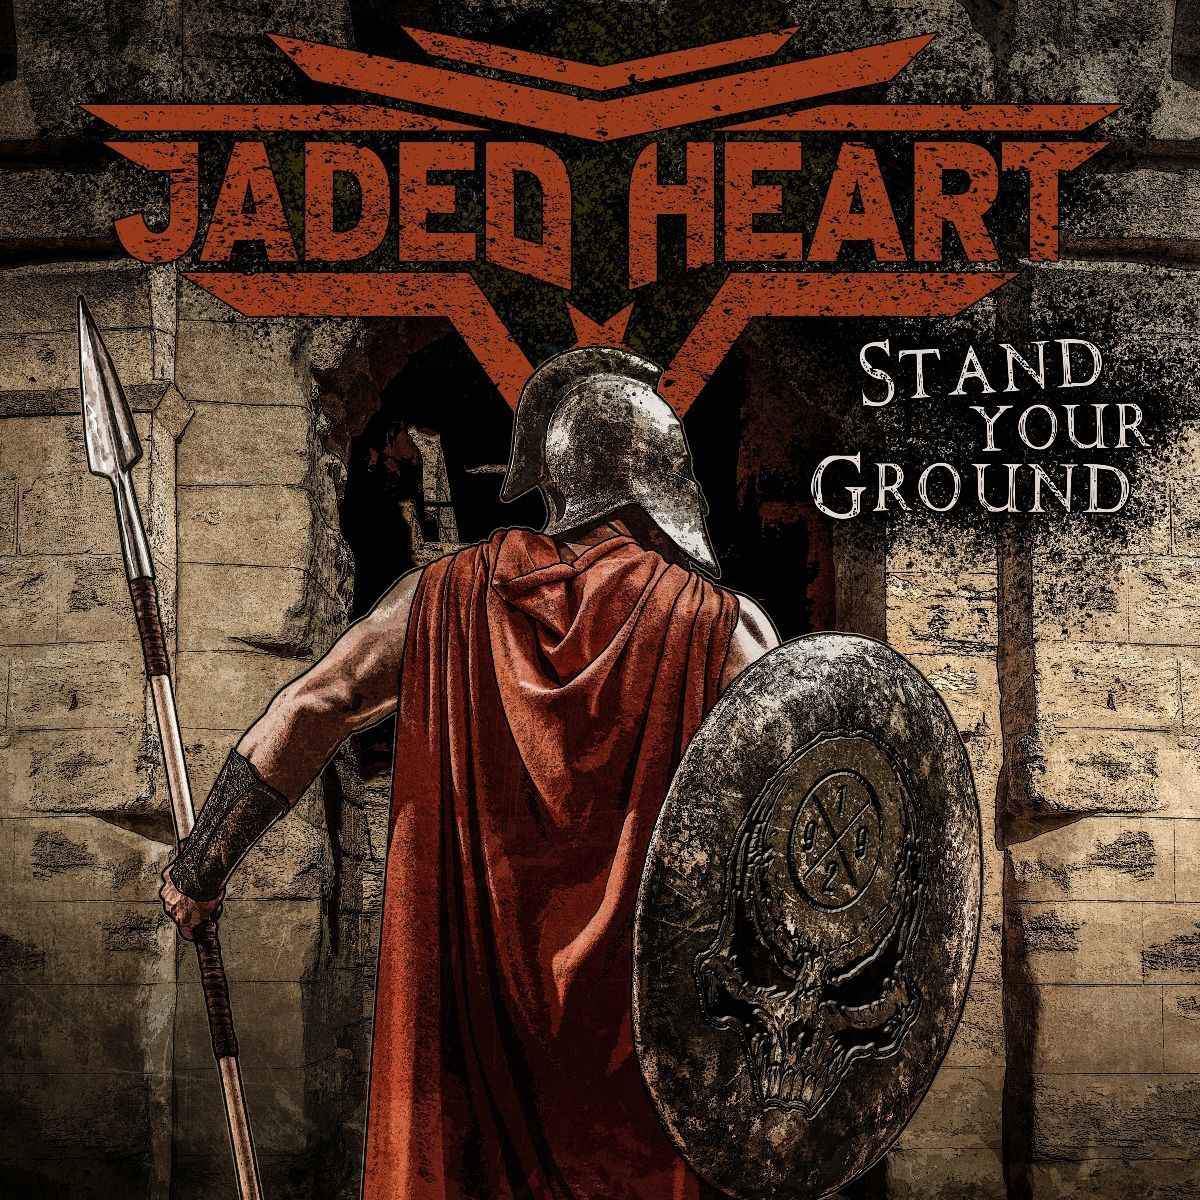 jaded heart - Stand Your Ground - album cover